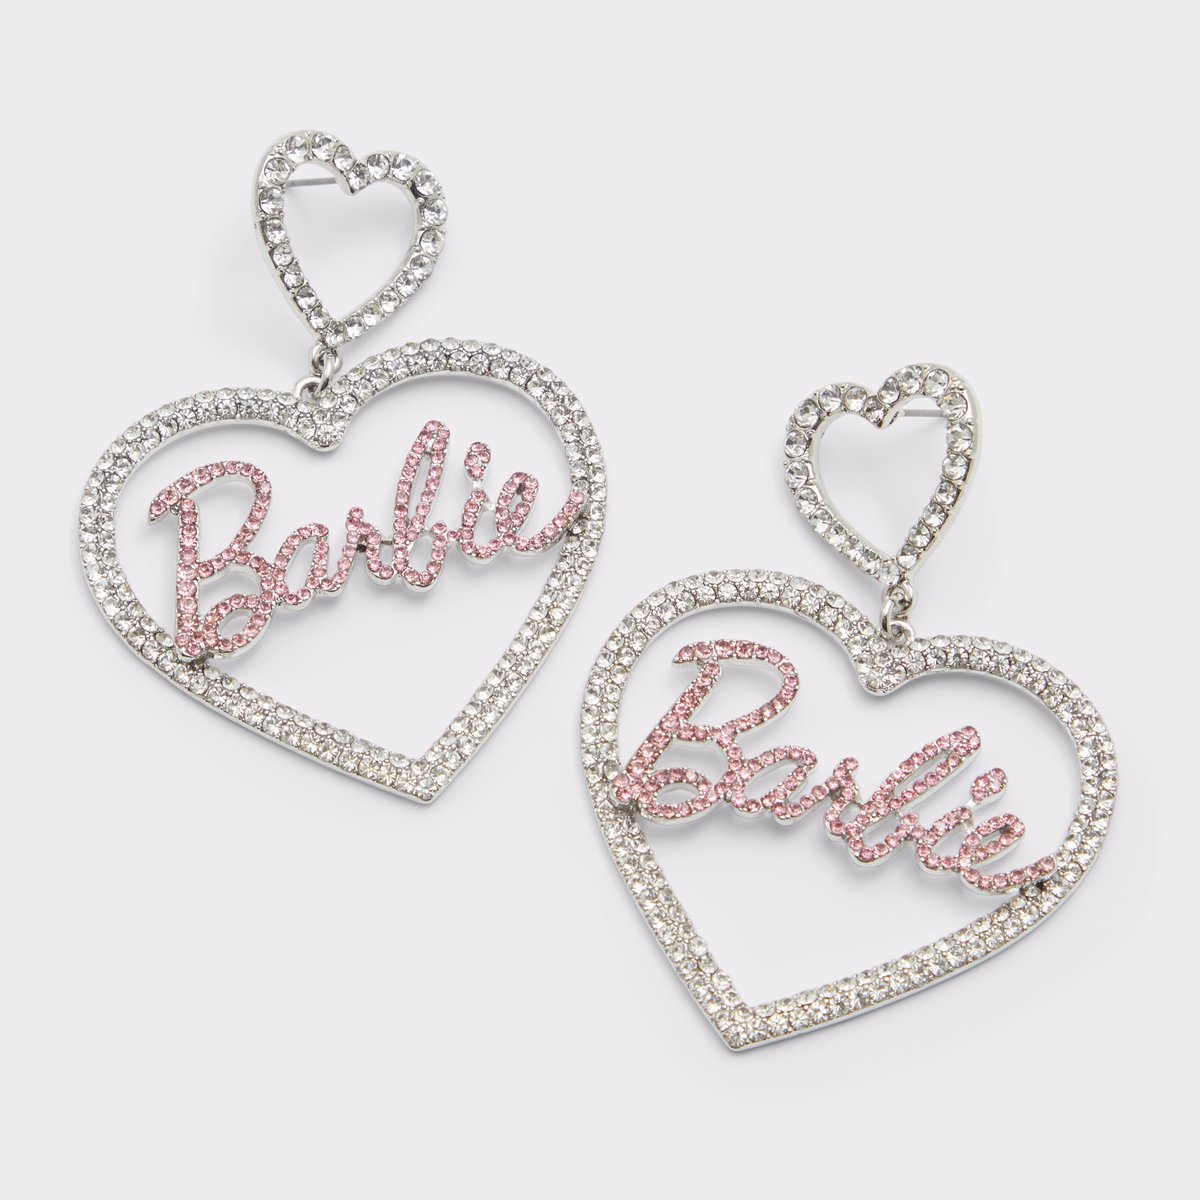 Barbie-Inspired Jewelry for Girls That Want to Shine